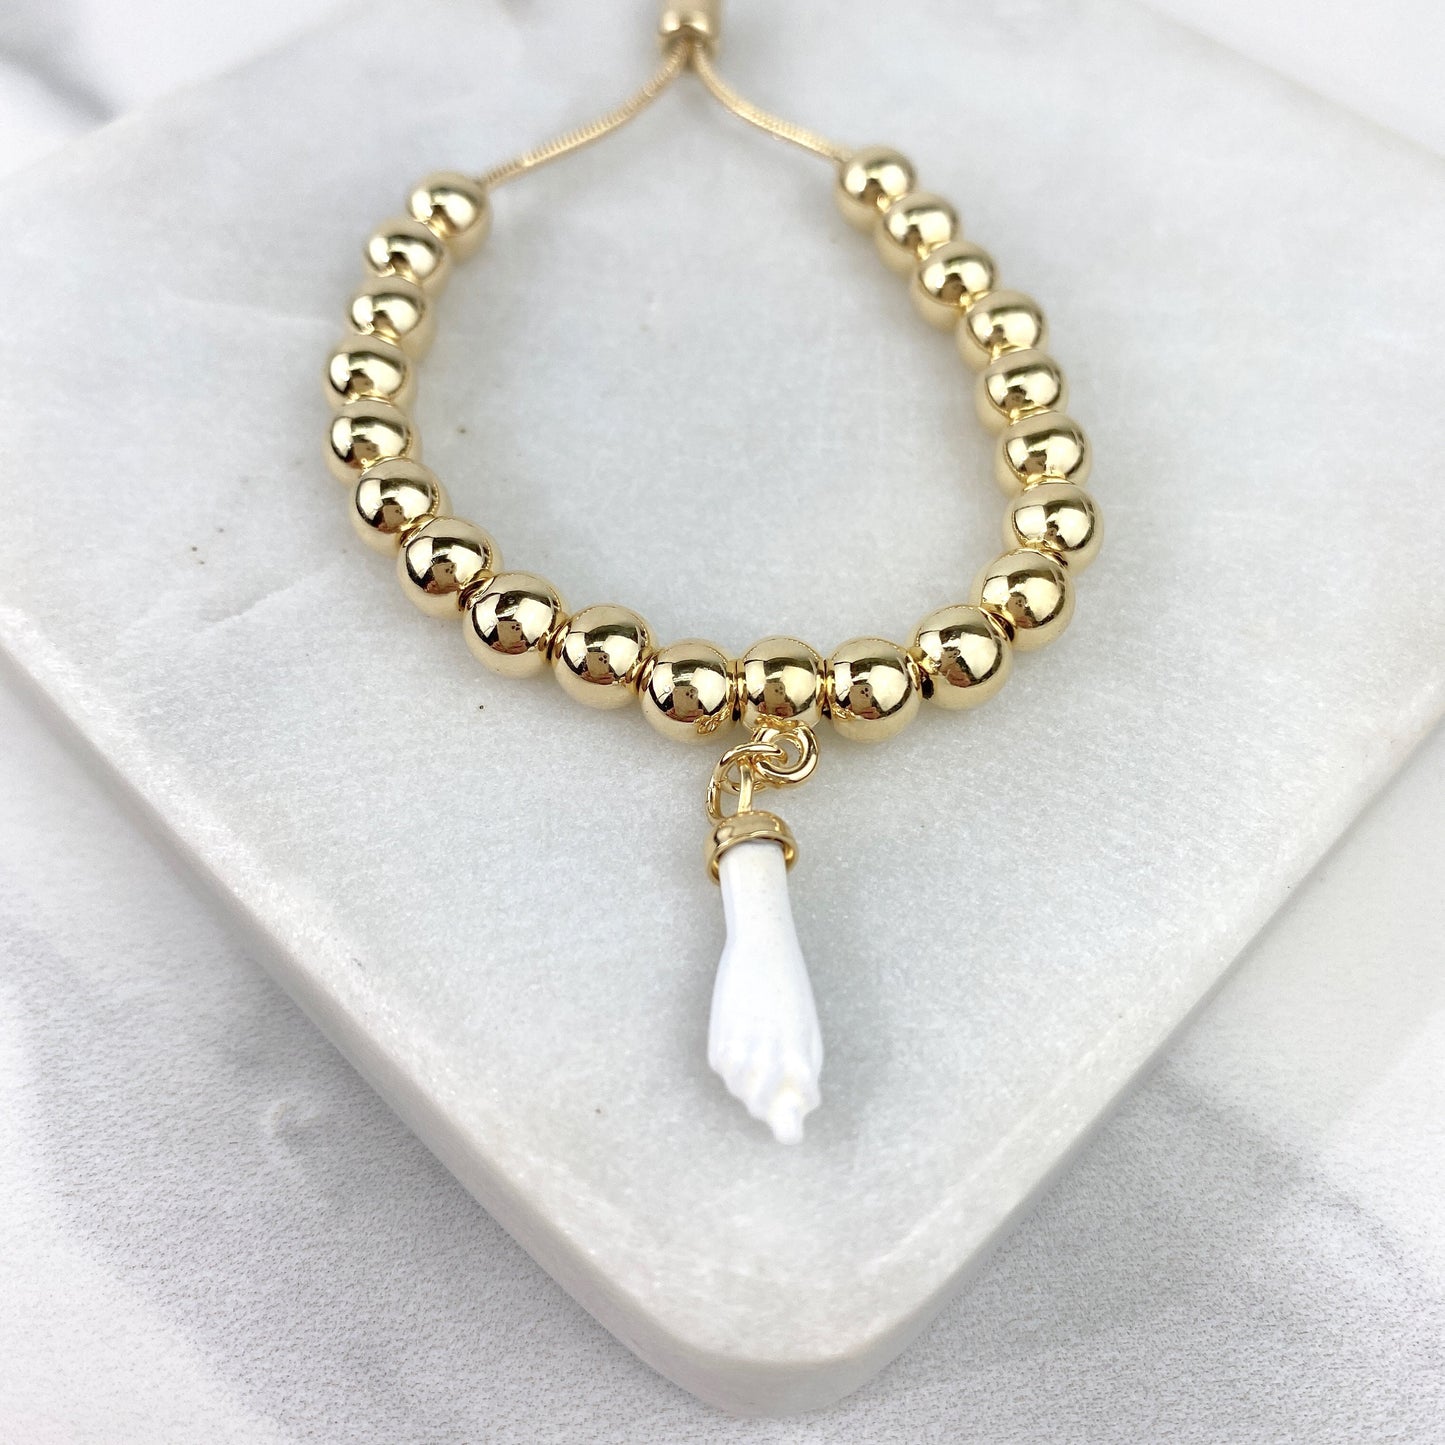 18k Gold Filled Beads, White Figa Hand Charm, Adjustable Bracelet, Protection Jewelry WholesaleJewelry Supplies